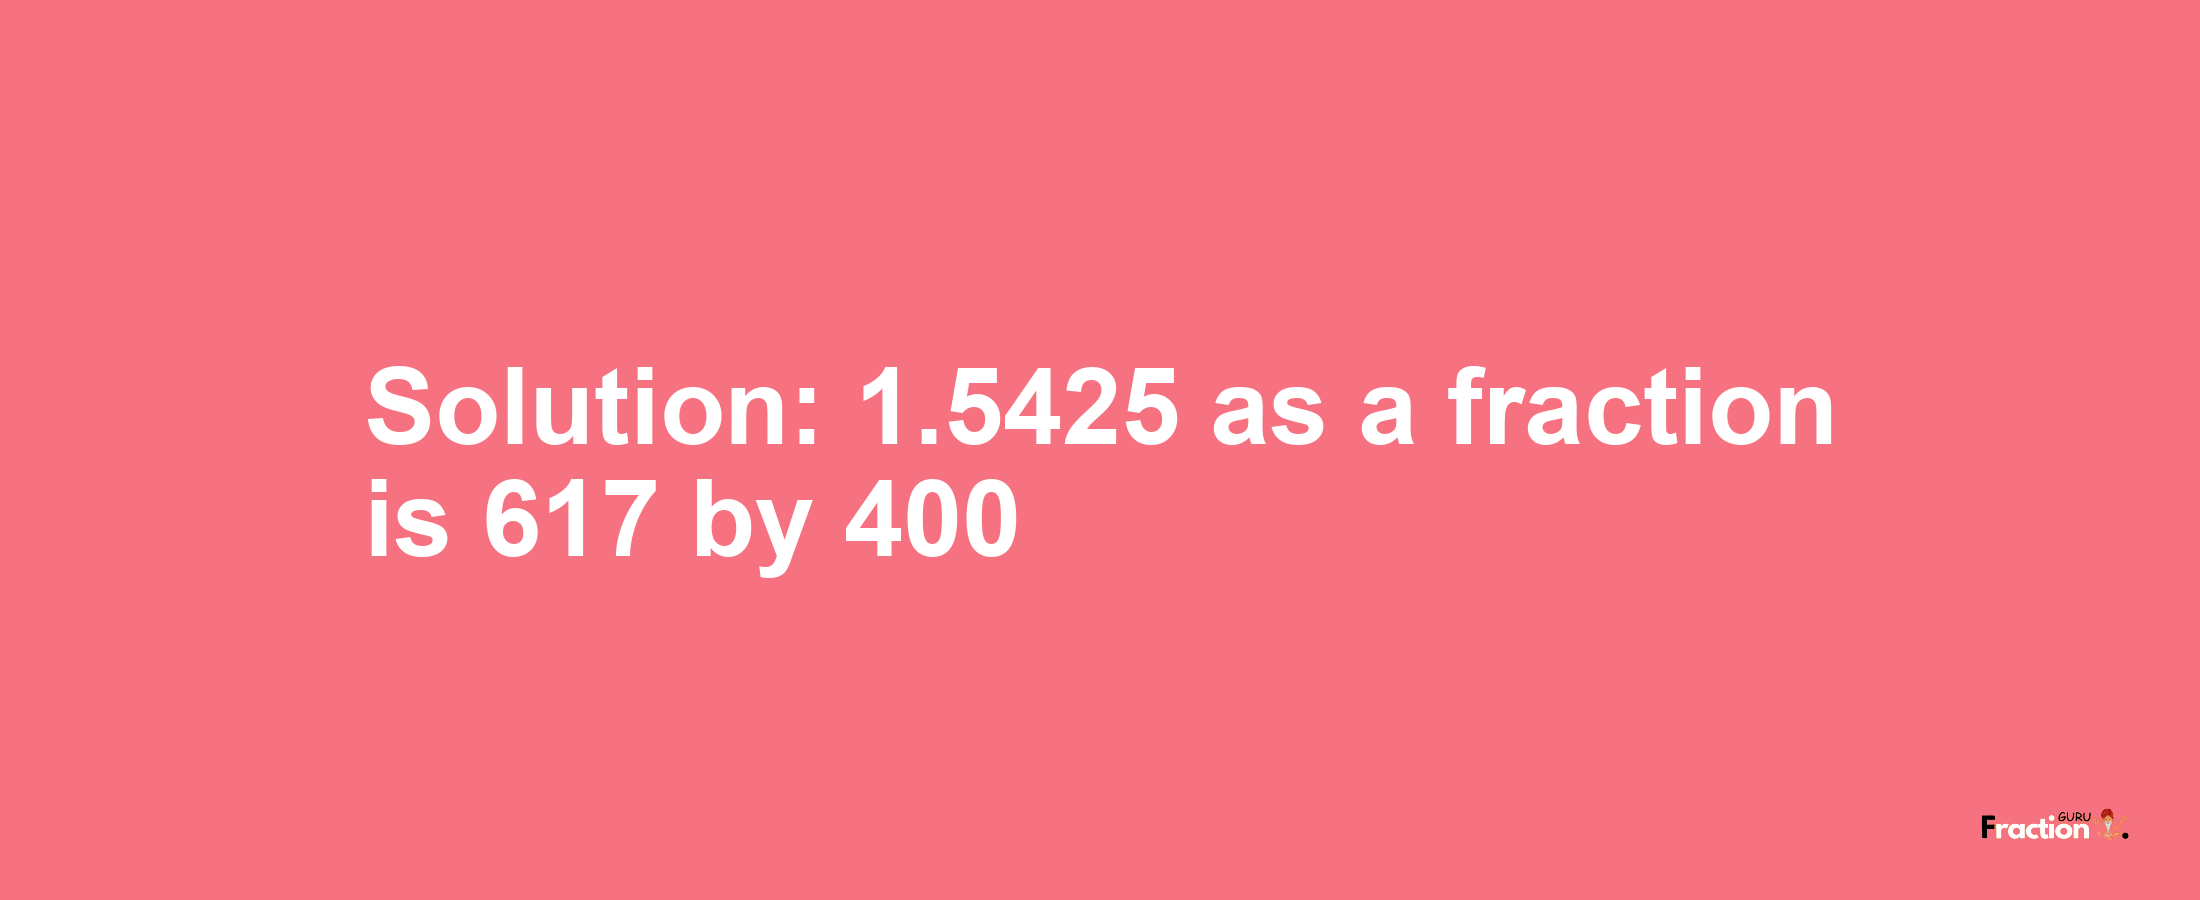 Solution:1.5425 as a fraction is 617/400